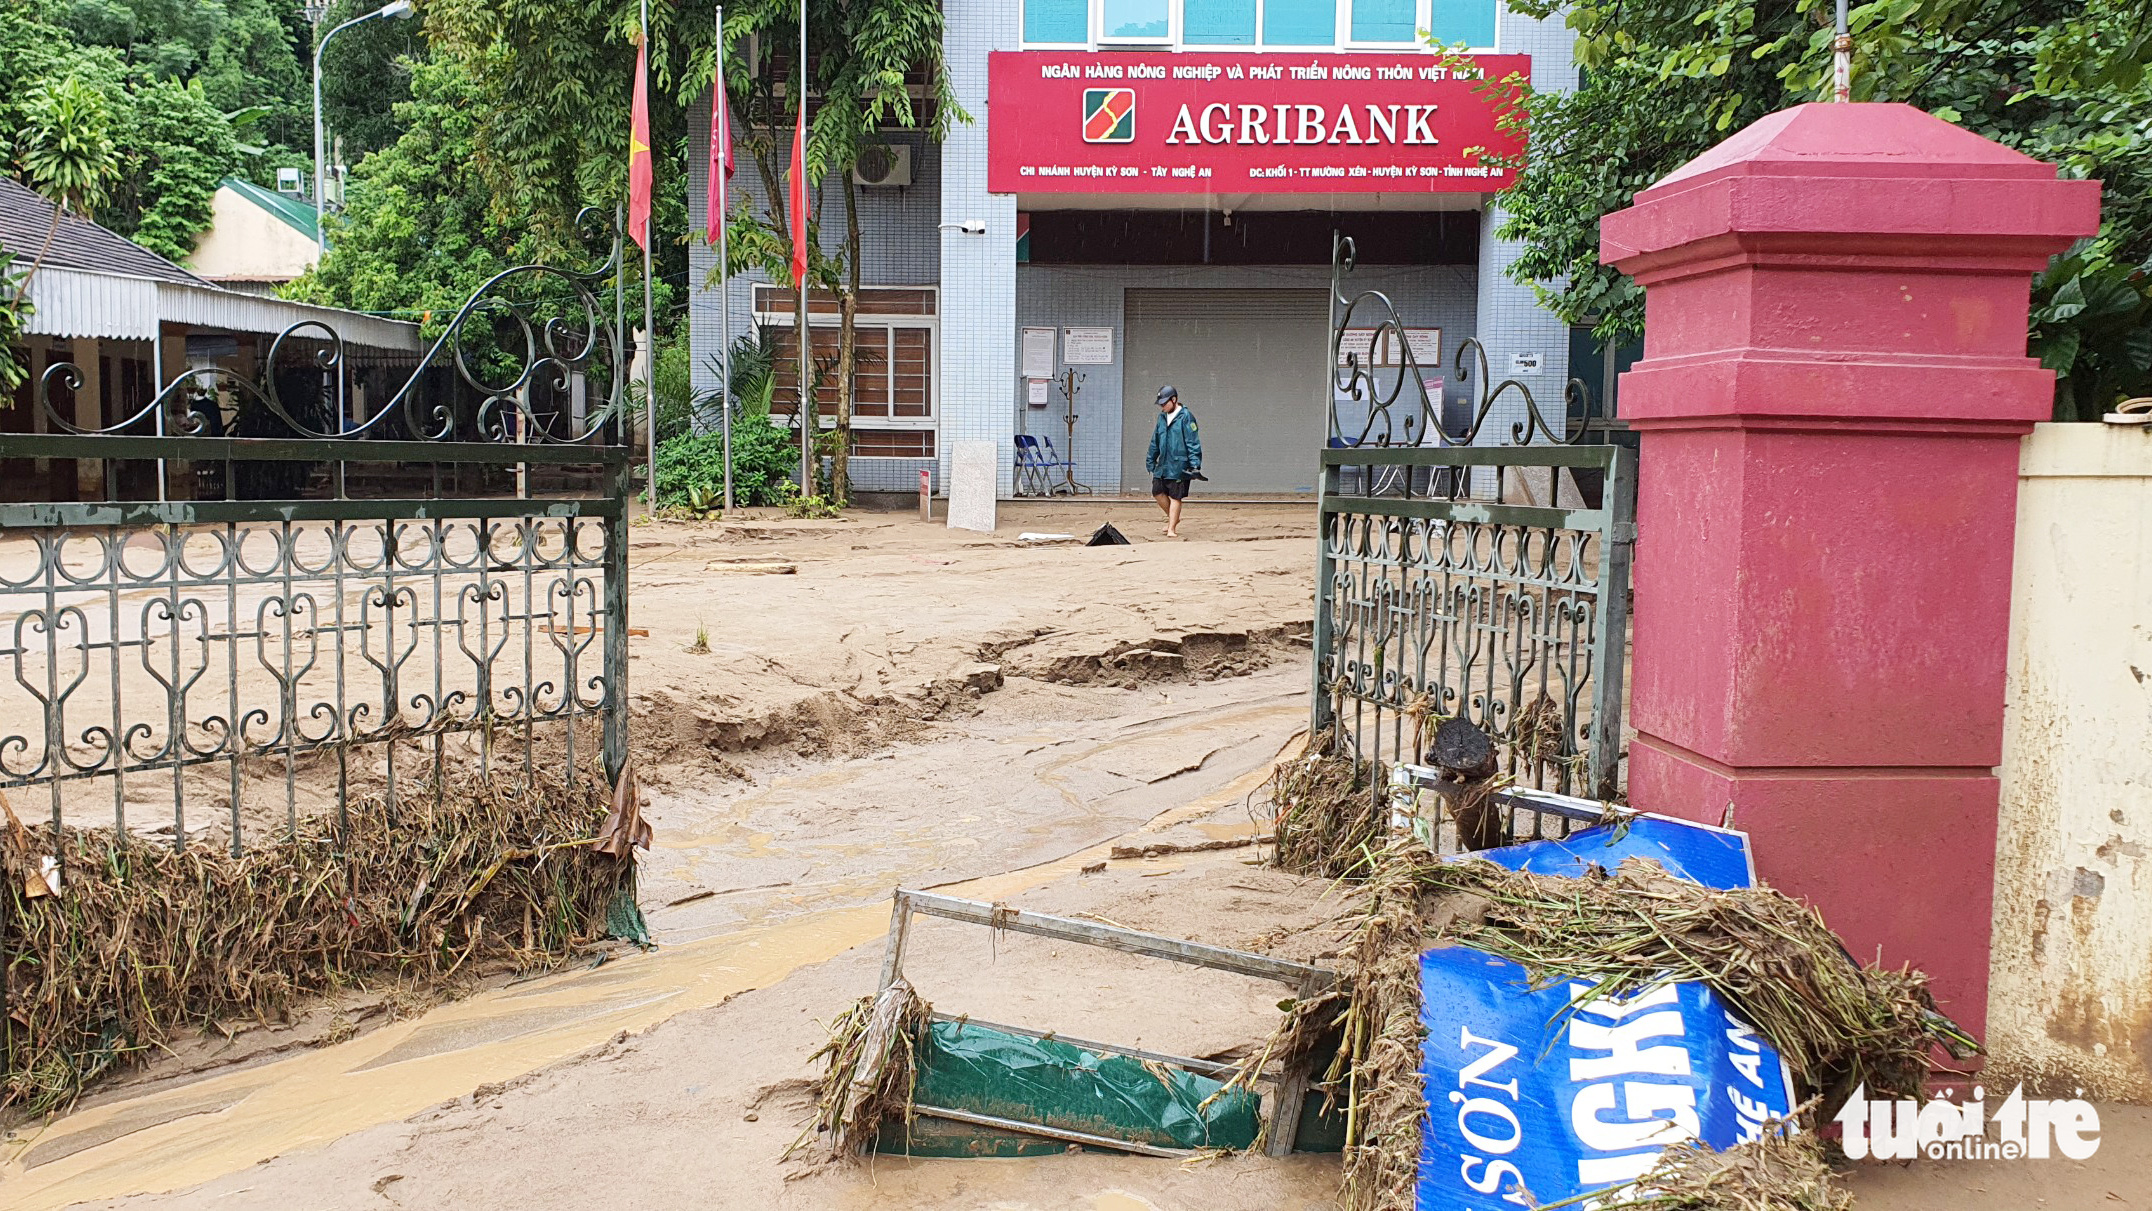 Debris spills into a bank office following a flash flood in Ky Son District, Nghe An Province, Vietnam, October 2, 2022. Photo: Duong Tinh / Tuoi Tre